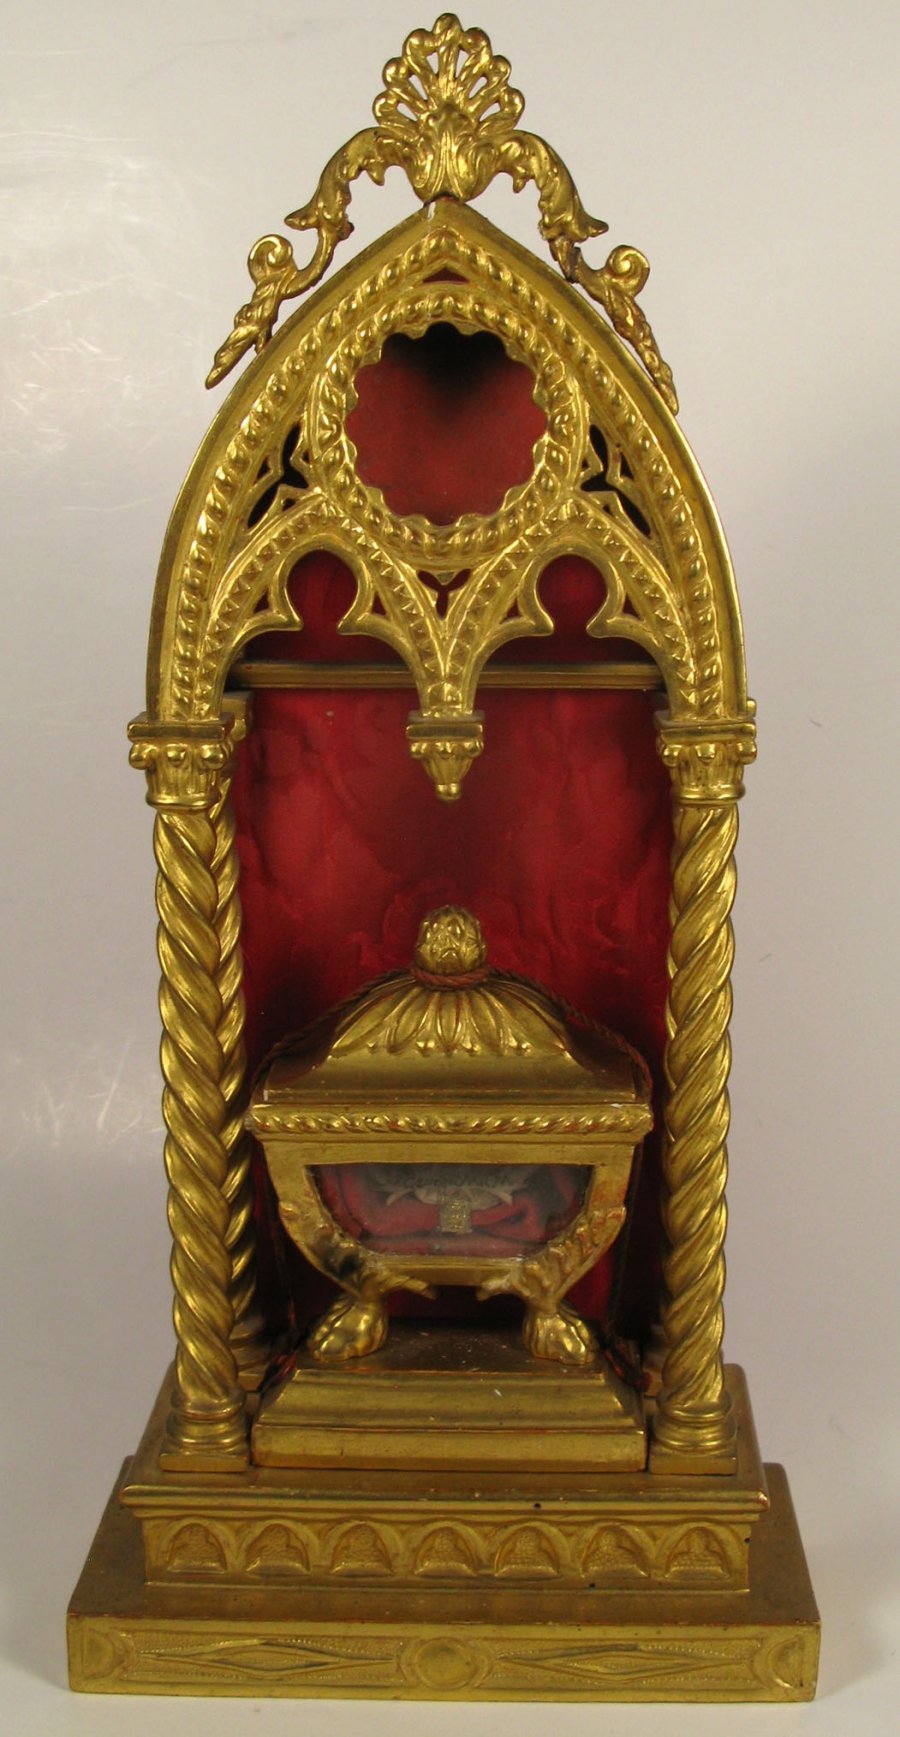 Sold at Auction: Gothic Reliquary Brass Box